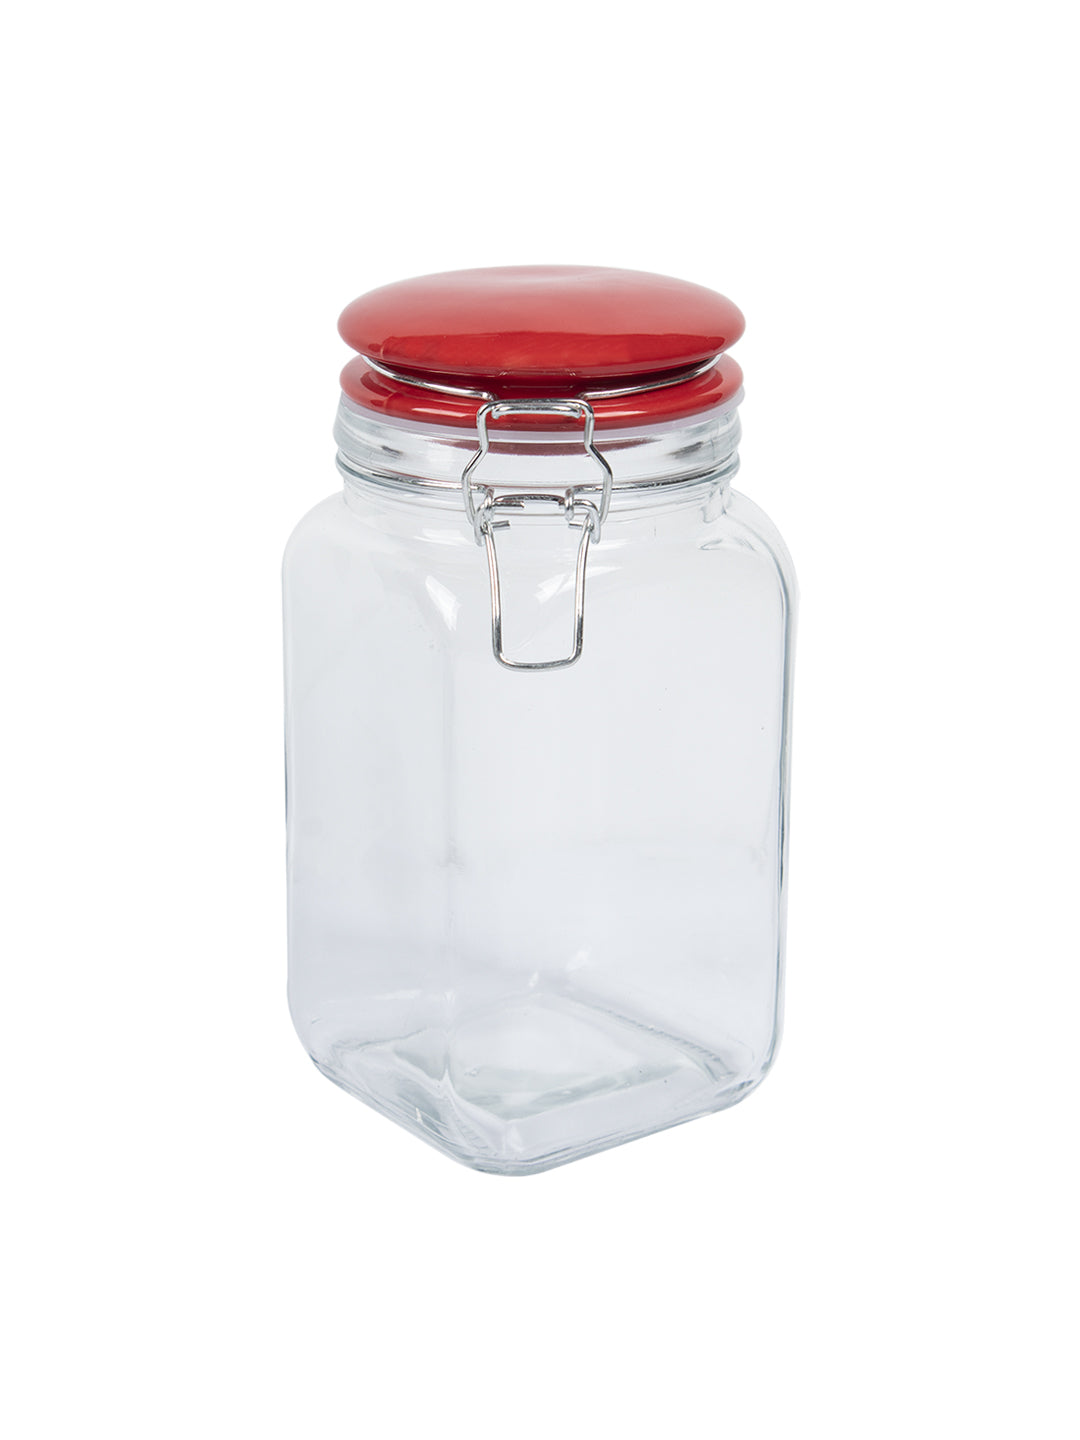 Glass Jar With Red Ceramic Lid - 1200 Ml